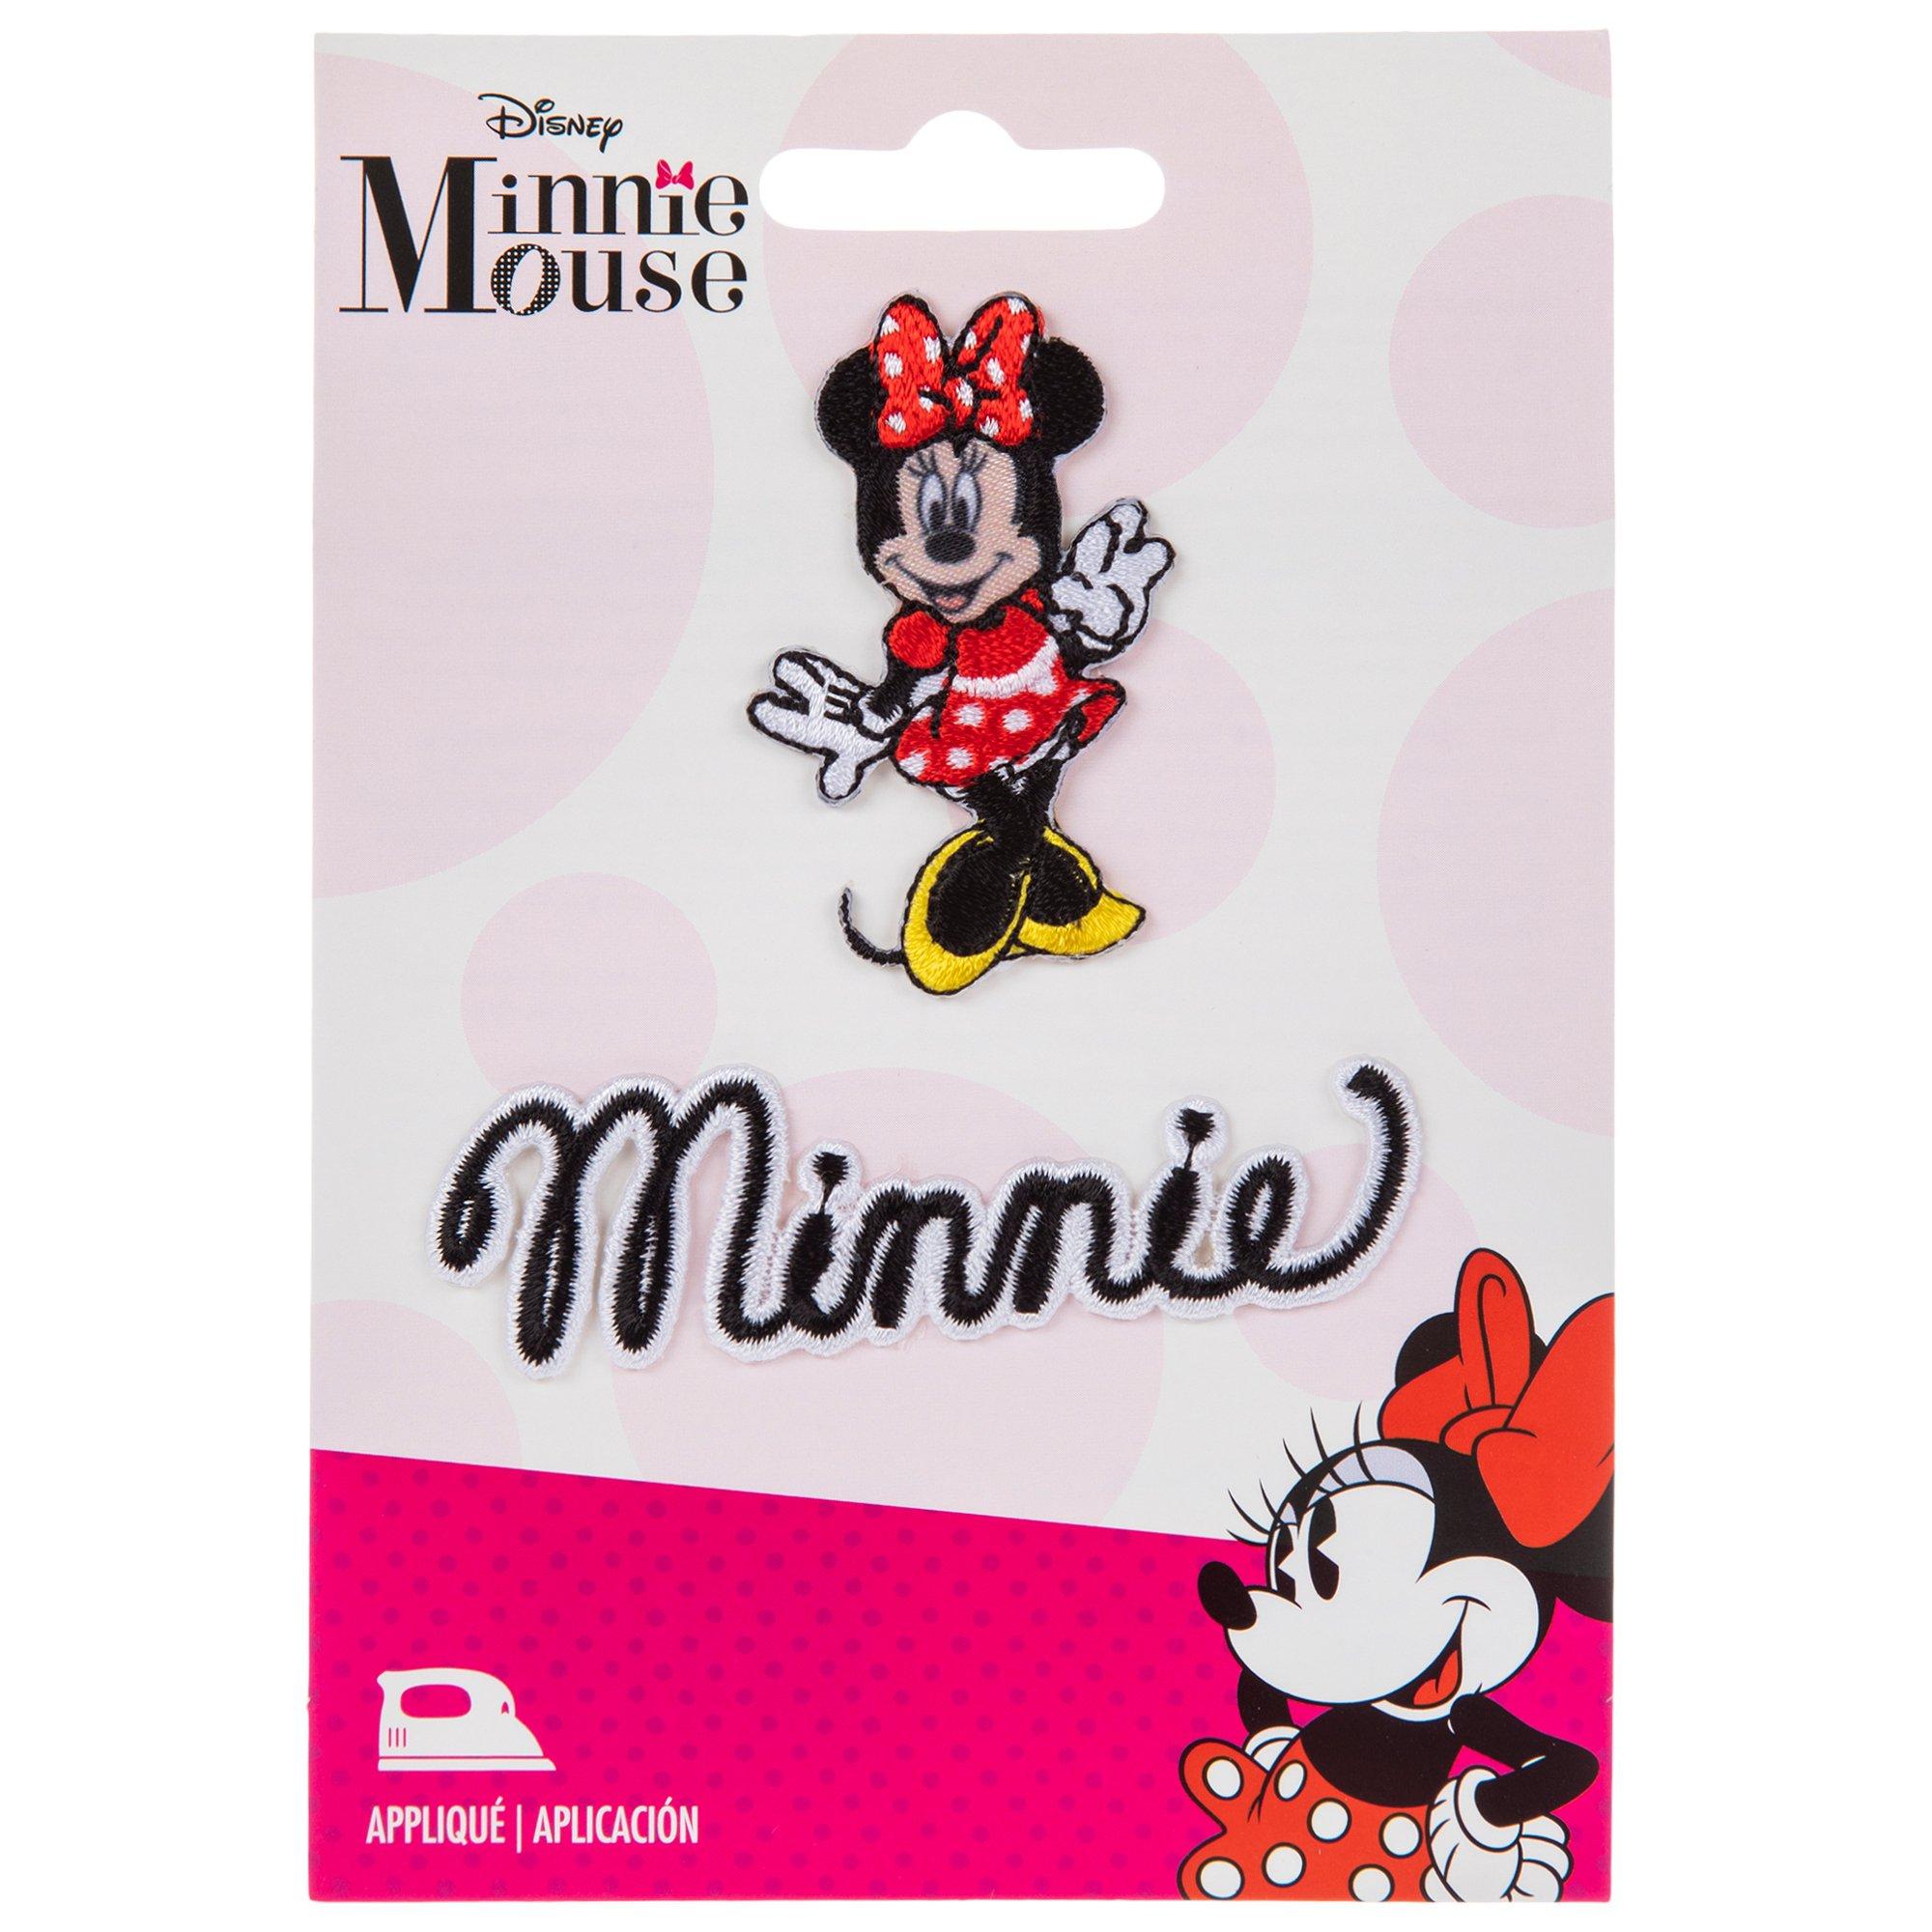 1 PC - 2.75” Disney Minnie Mouse – Iron On Cloth Embroidered Patches  Appliqué